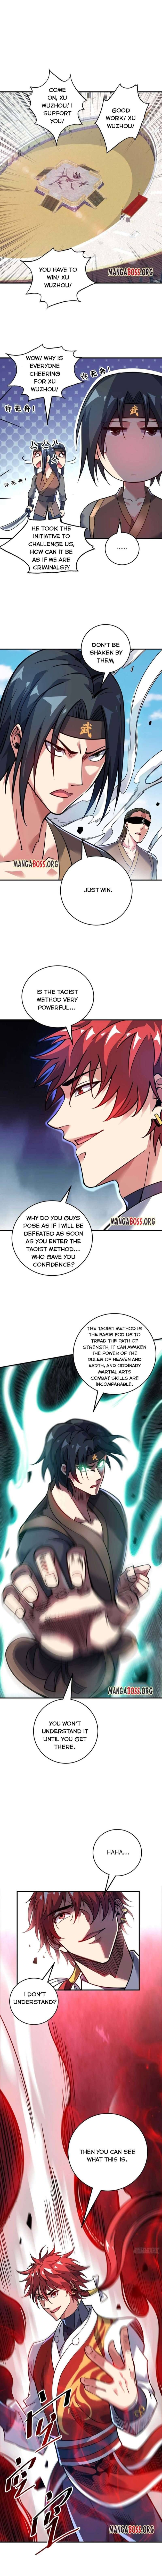 The First Son-In-Law Vanguard of All Time Chapter 137 page 3